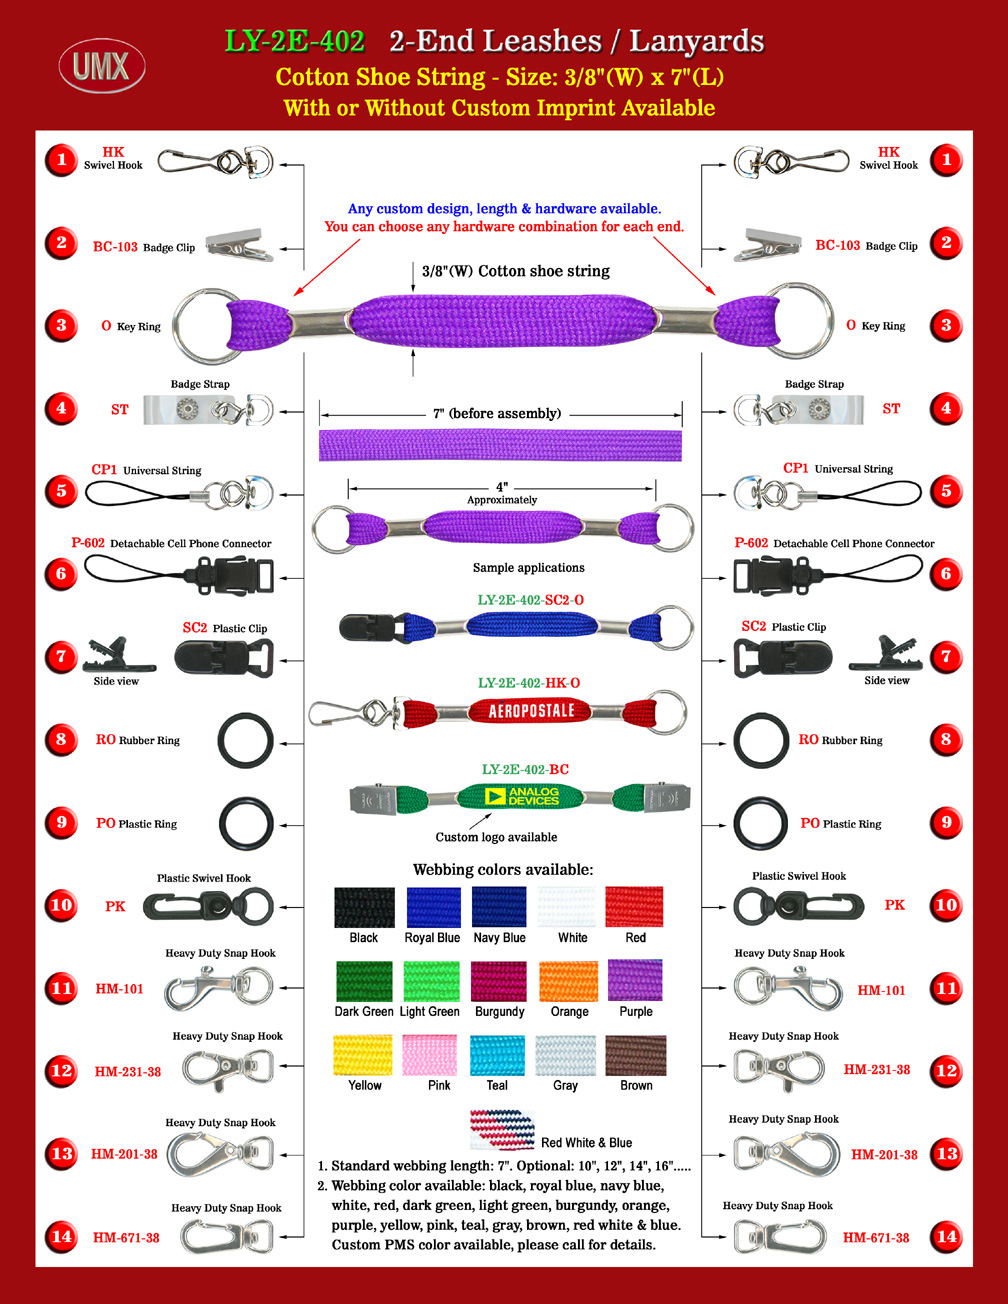 The 3/8" cotton style flat strap 2-end lanyards have 13 colors available.